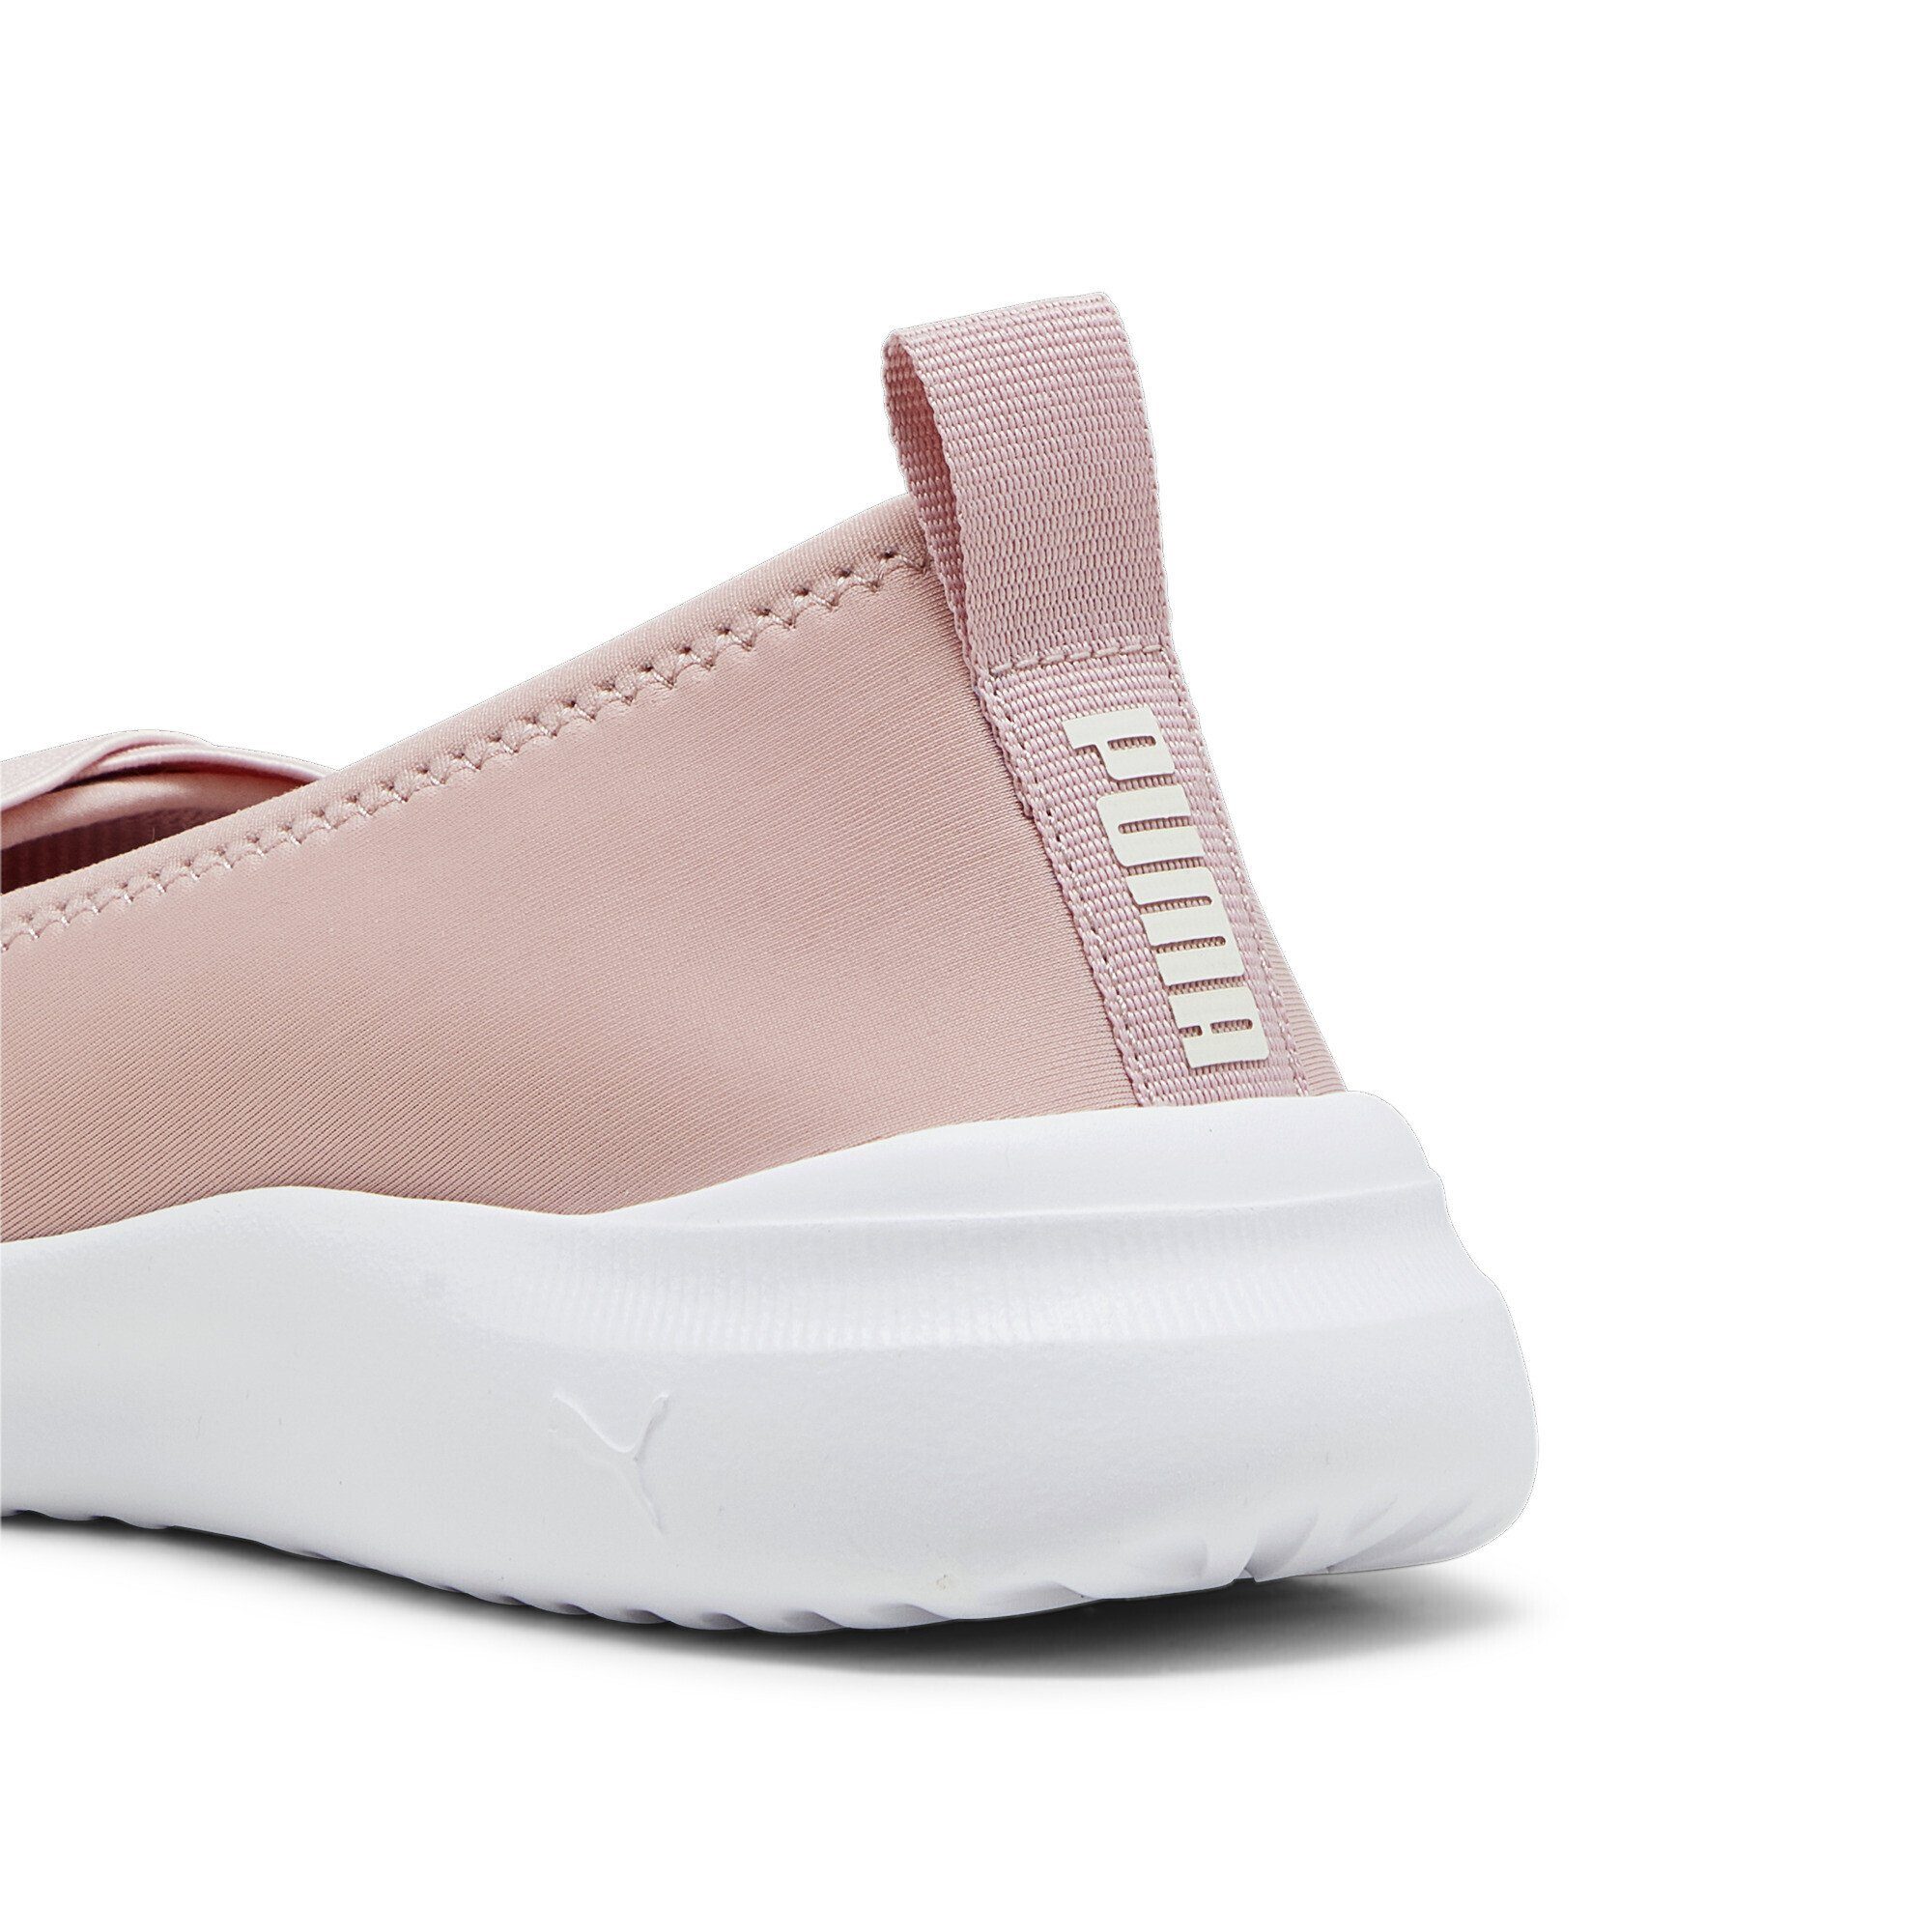 PUMA Adelina Sneakers White Pink Ivory Future Damen Frosted Trainingsschuh